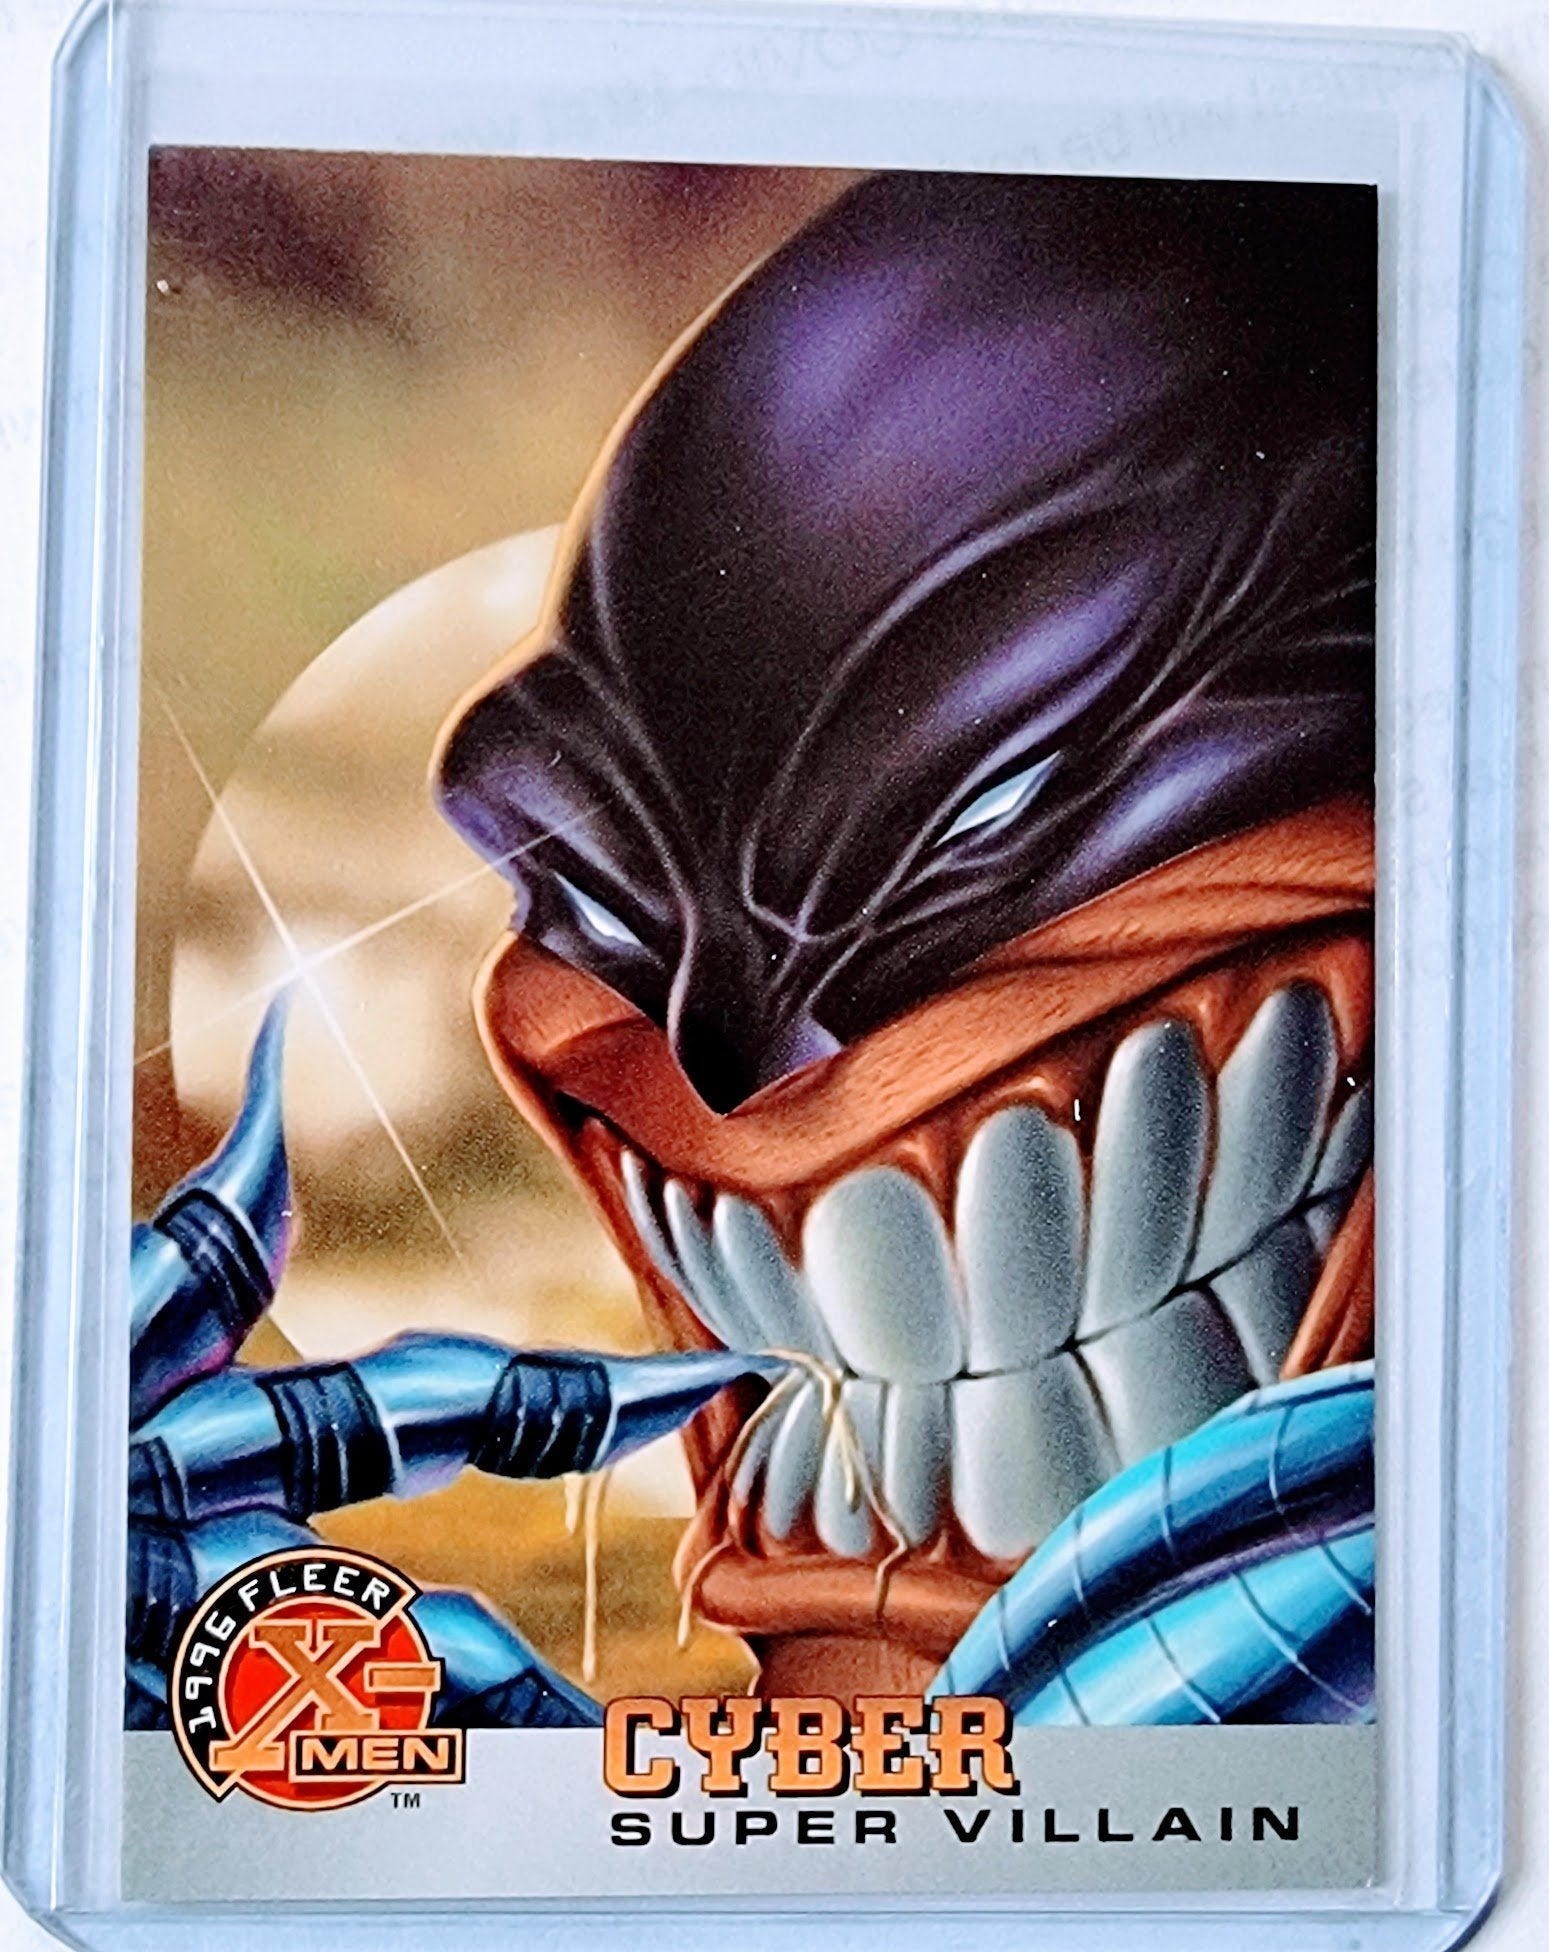 1996 Fleer X-Men Cyber Super Villain Marvel Trading Card GRB1 simple Xclusive Collectibles   